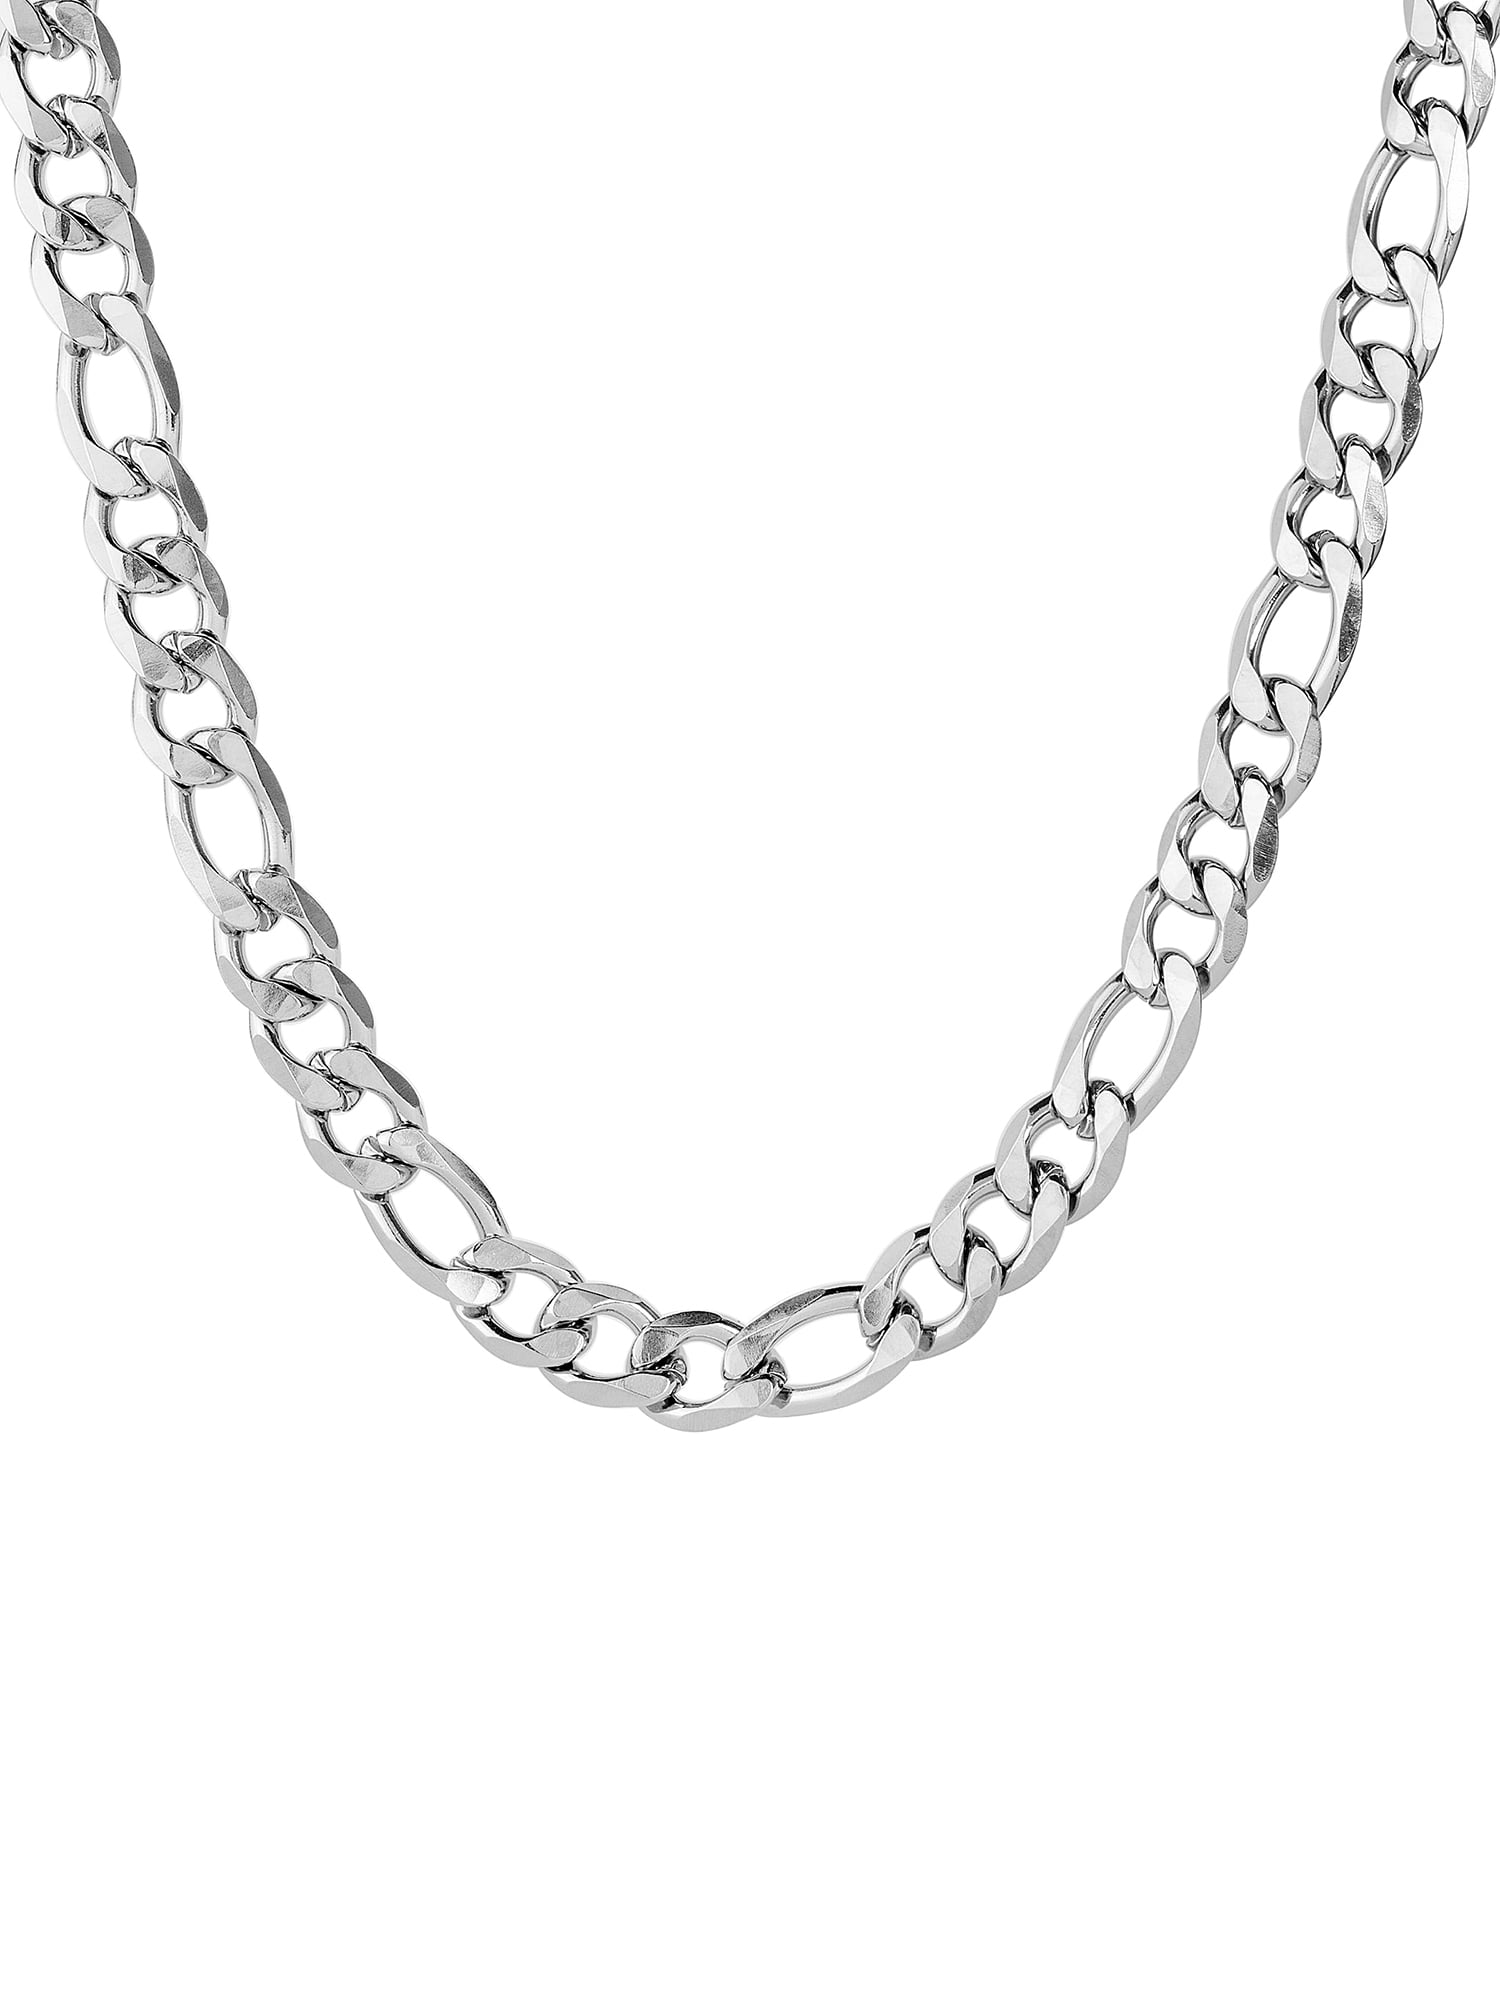 3-12MM Mens Women's Silver Stainless Steel Figaro Chain Necklace 18"-36" Jewelry 